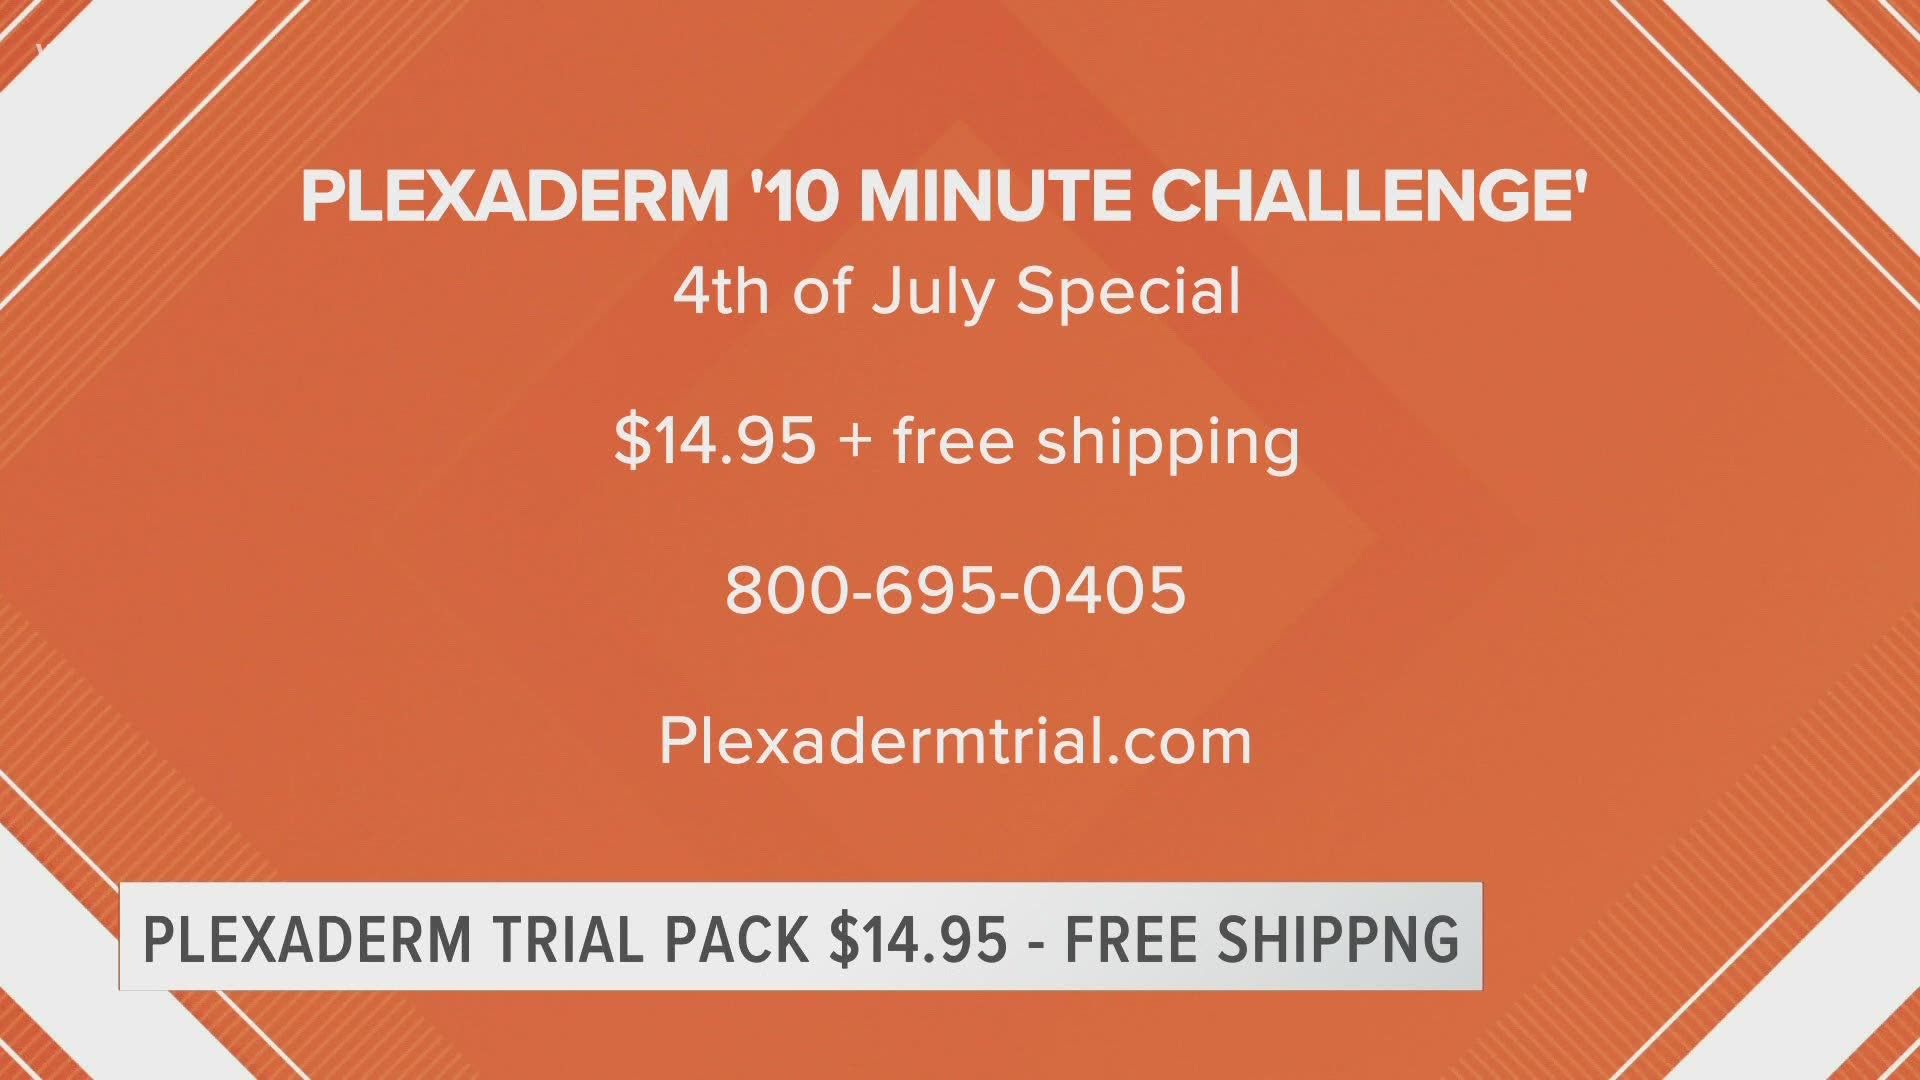 Want to look your absolute best? Plexaderm can help!